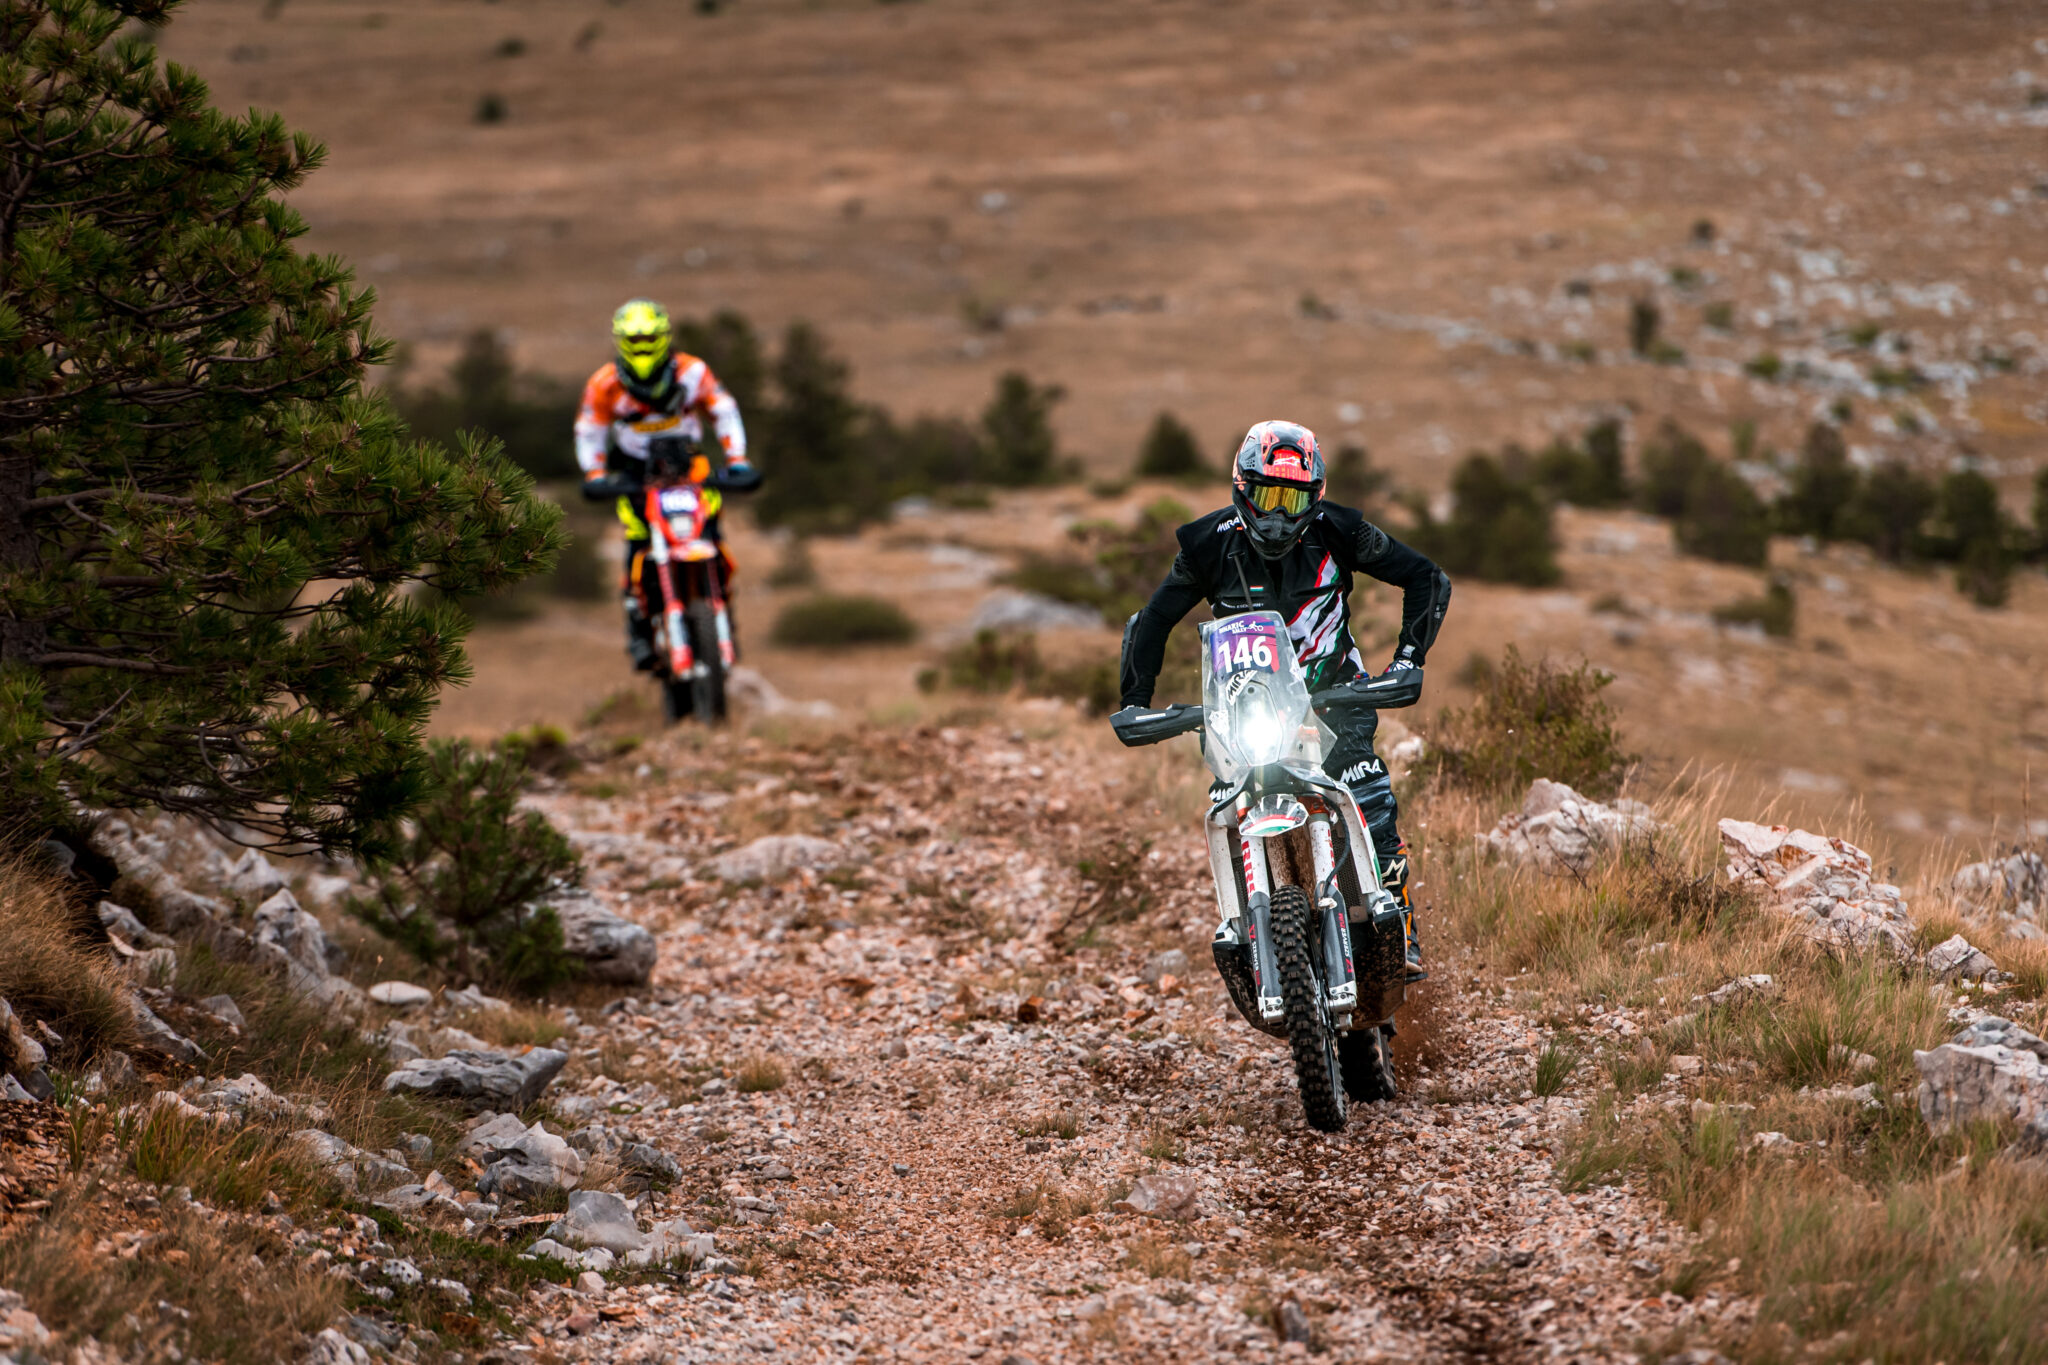 Dinaric Rally 2022 Recap and Ride Report // Cross Country ADV